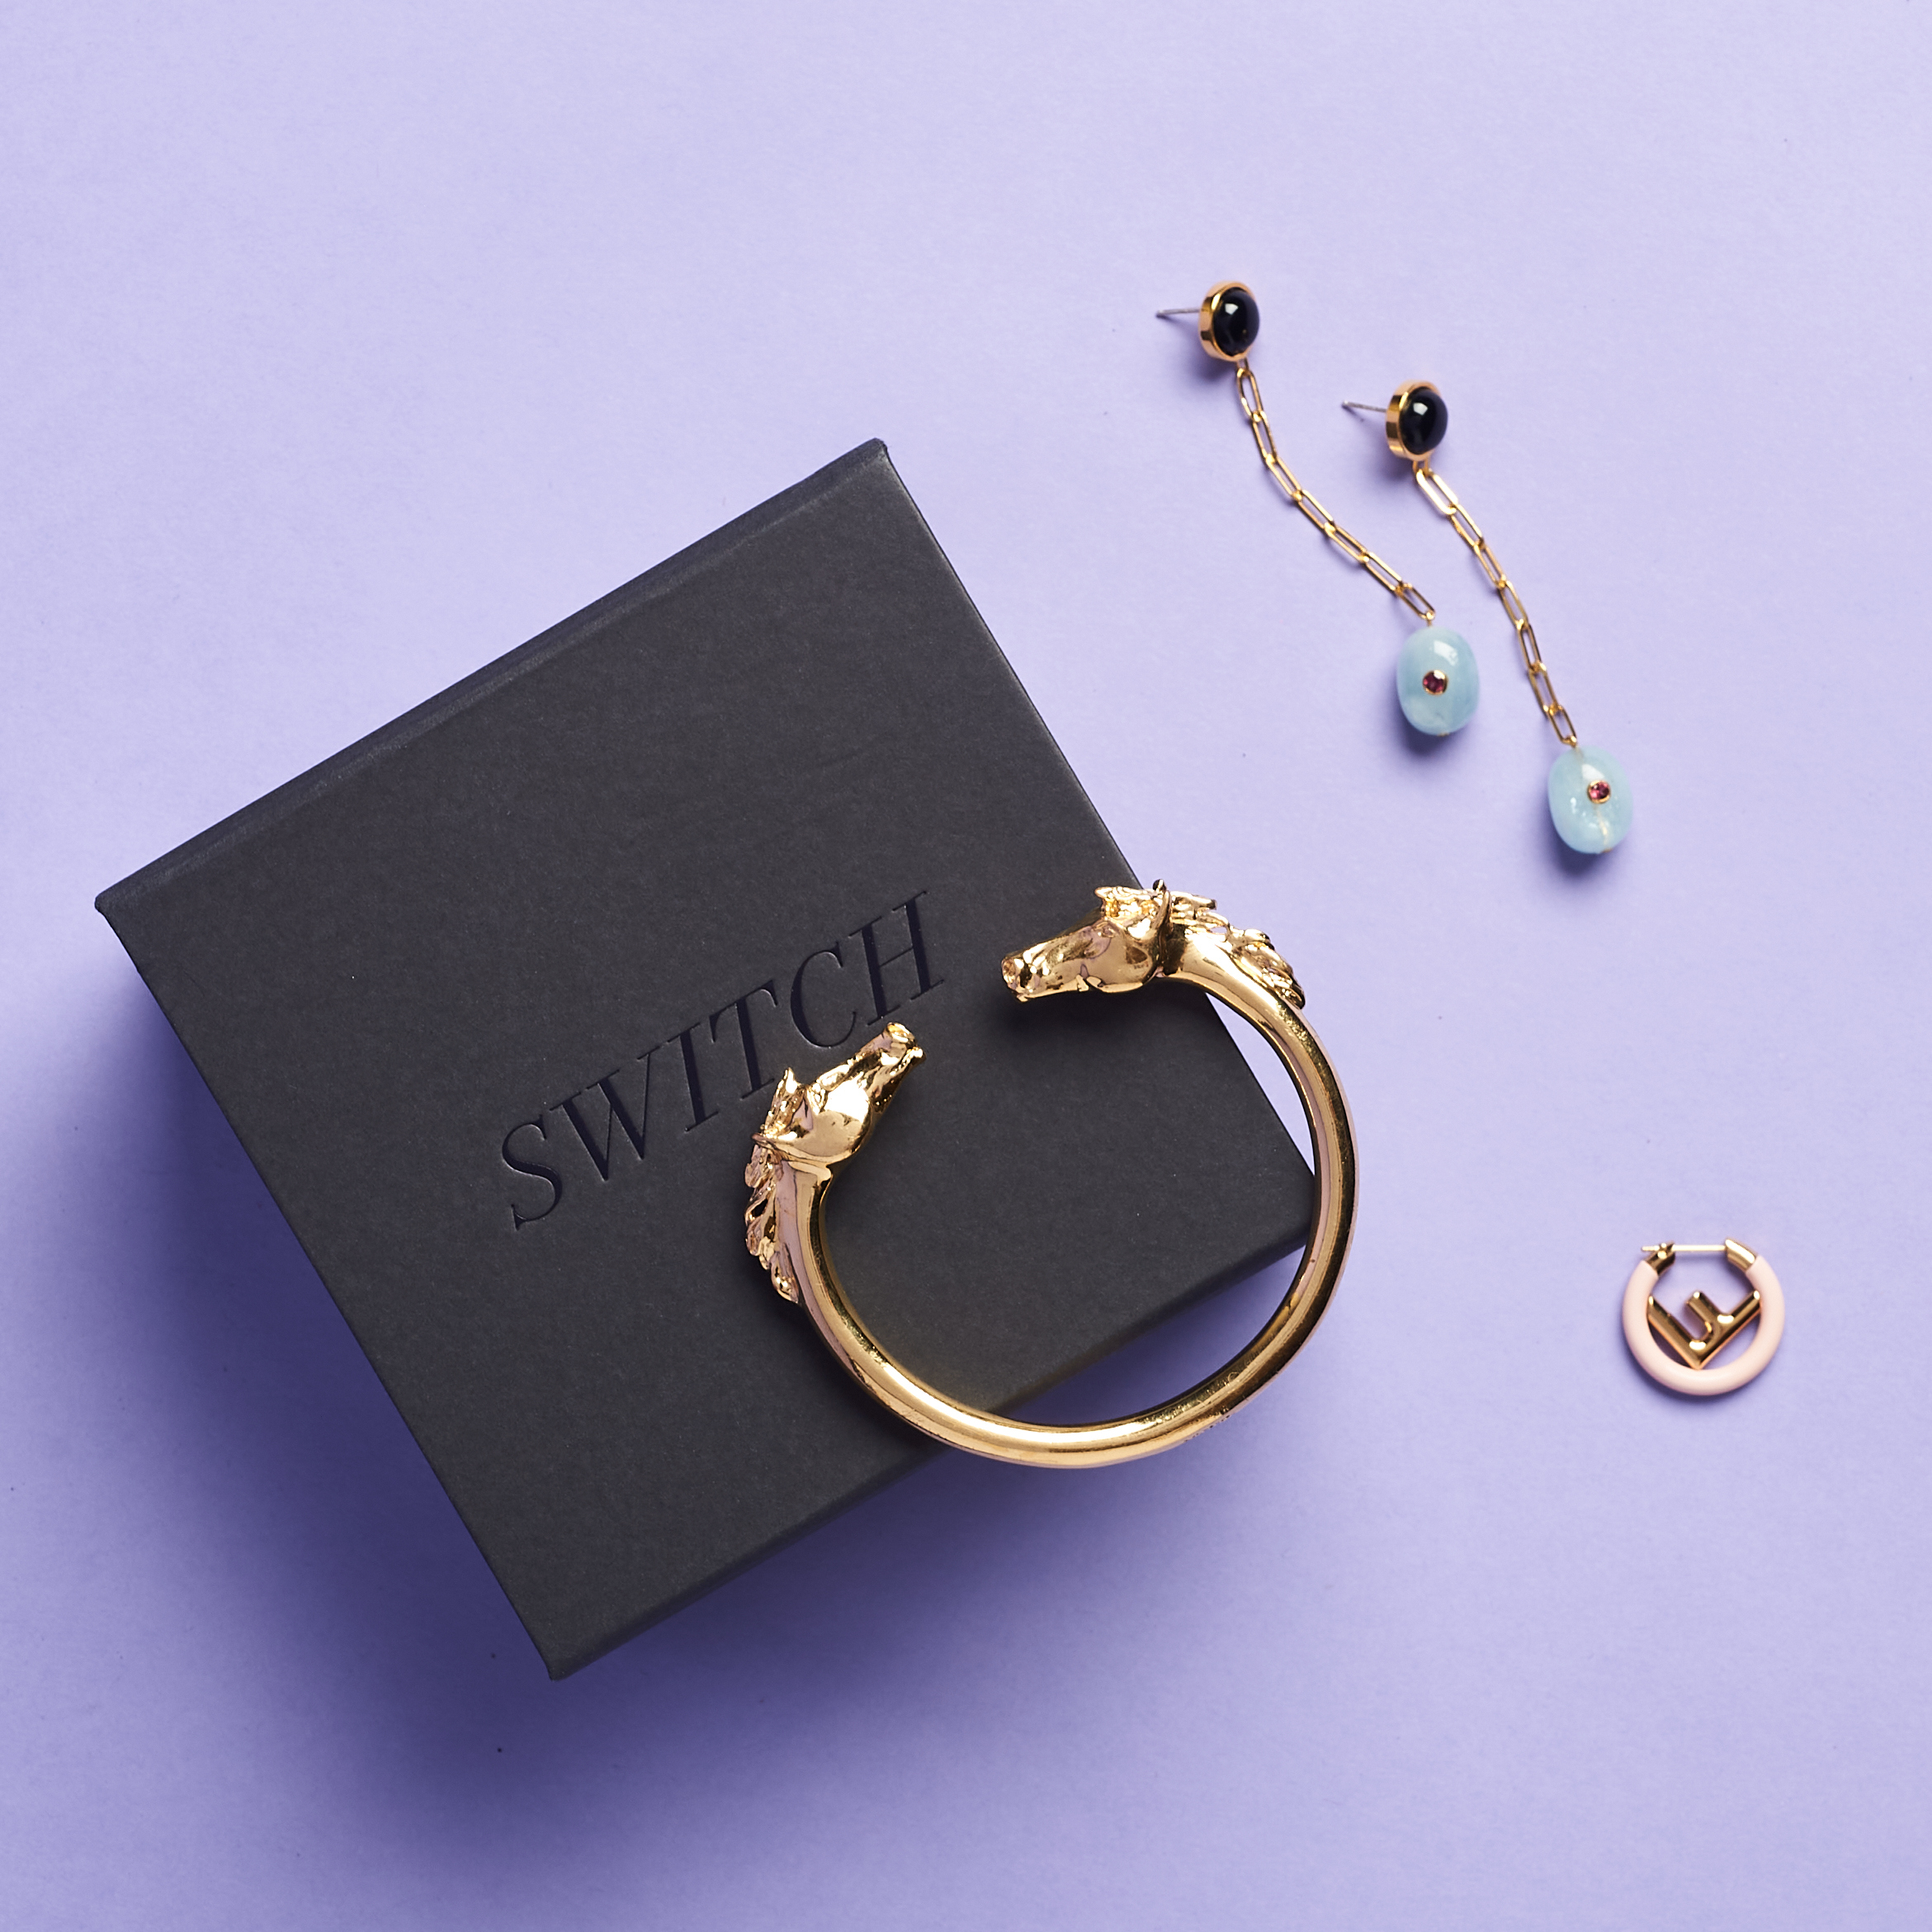 Get 50% Off Your First Month of Designer Jewelry Rentals From Switch With Our MSA Code